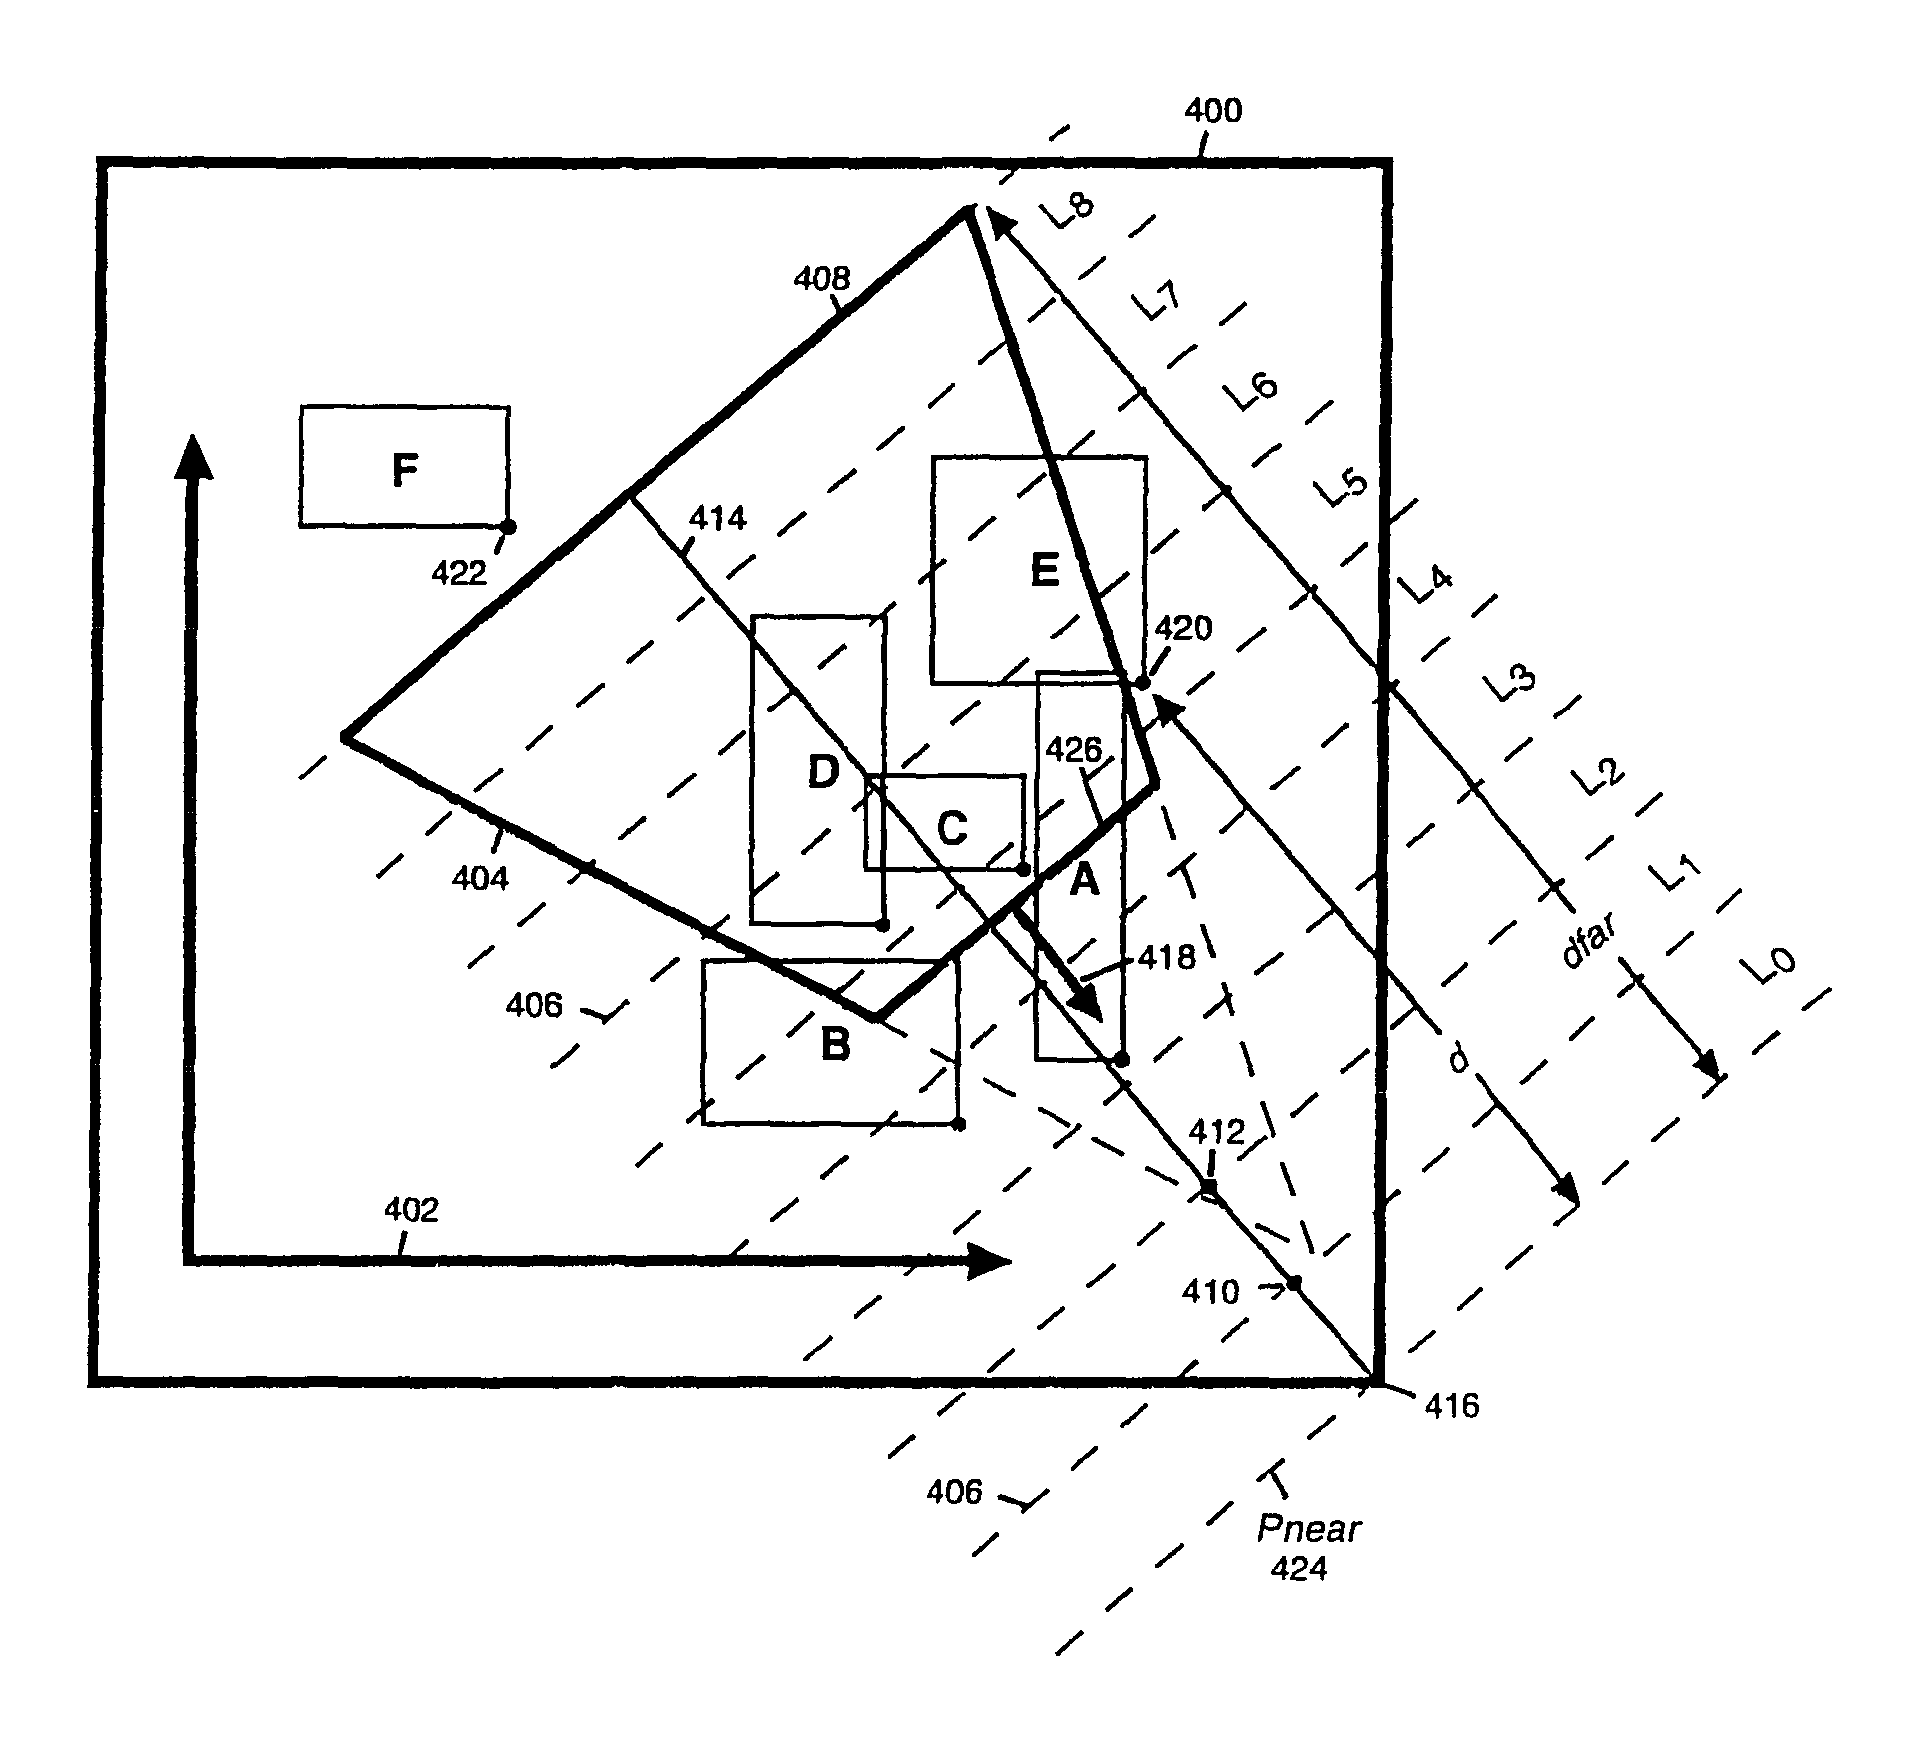 System, method and computer program product for updating a far clipping plane in association with a hierarchical depth buffer